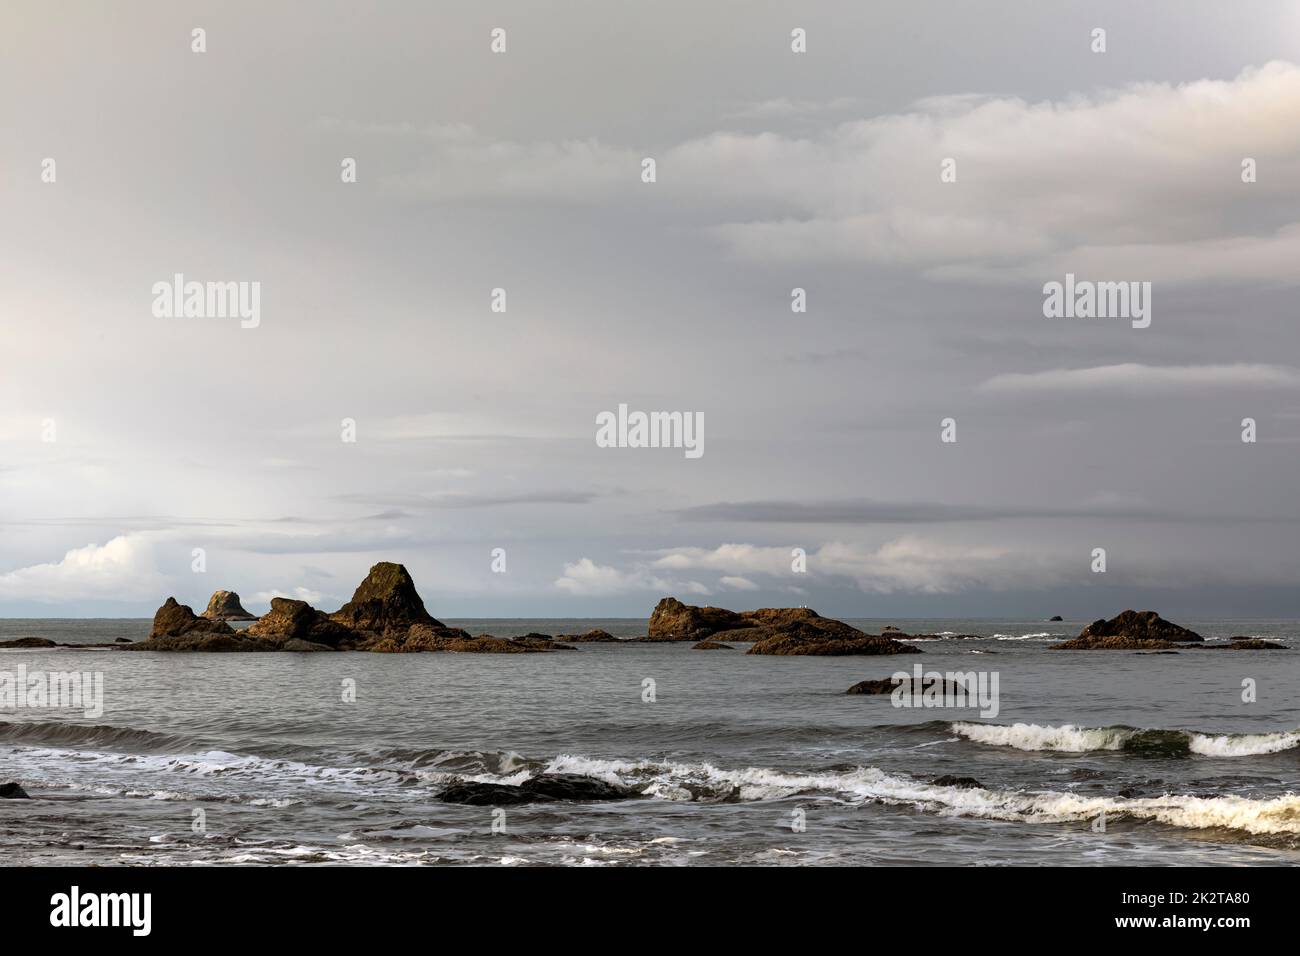 WA22061-00...WASHINGTON - Early morning on a cloudy day at Ruby Beach in Olympic National Park. Stock Photo